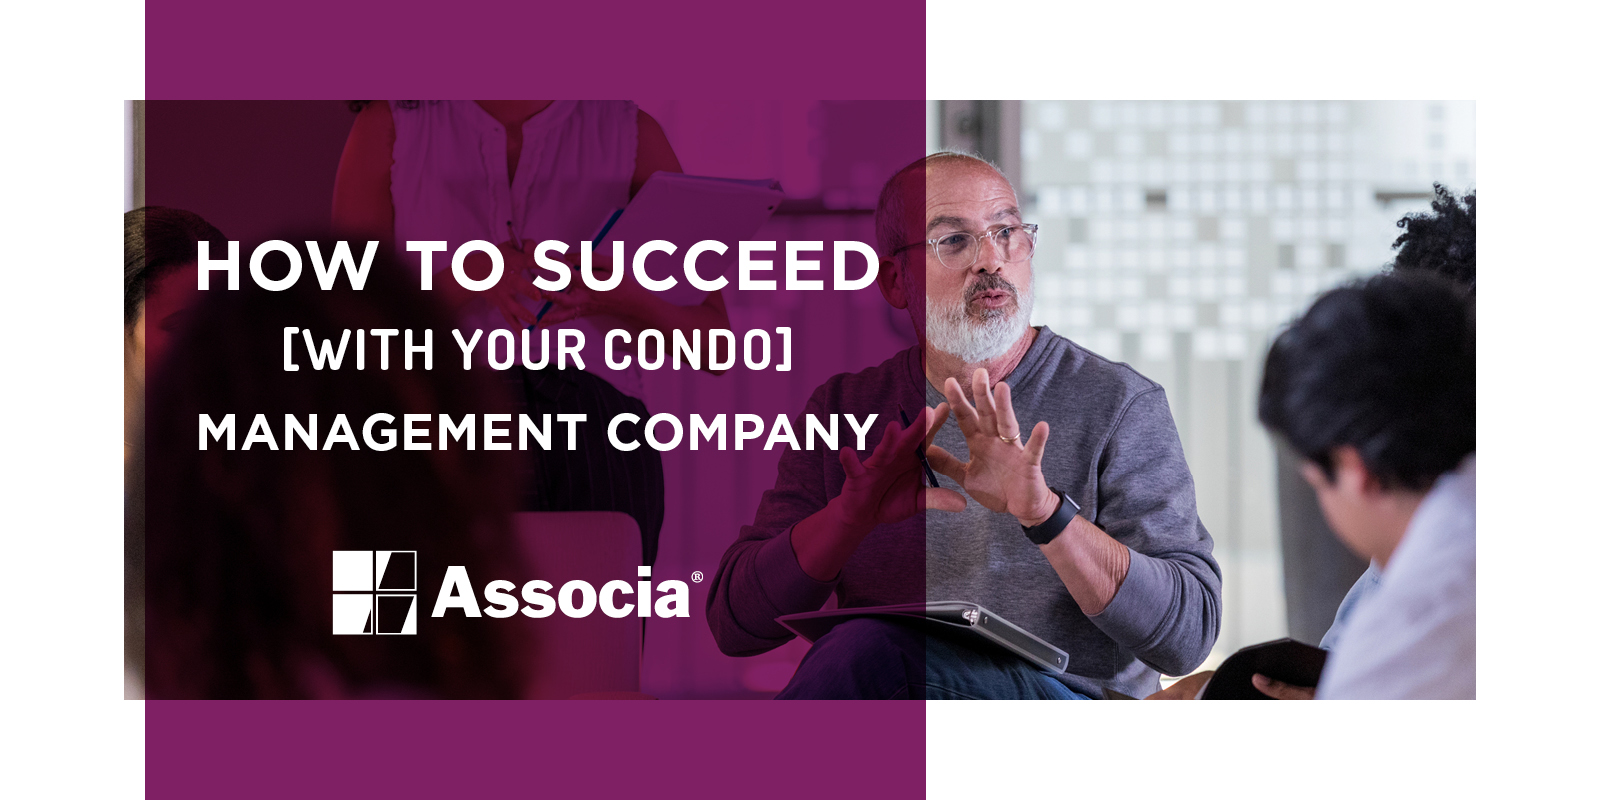 How to Succeed with Your Condo Management Company